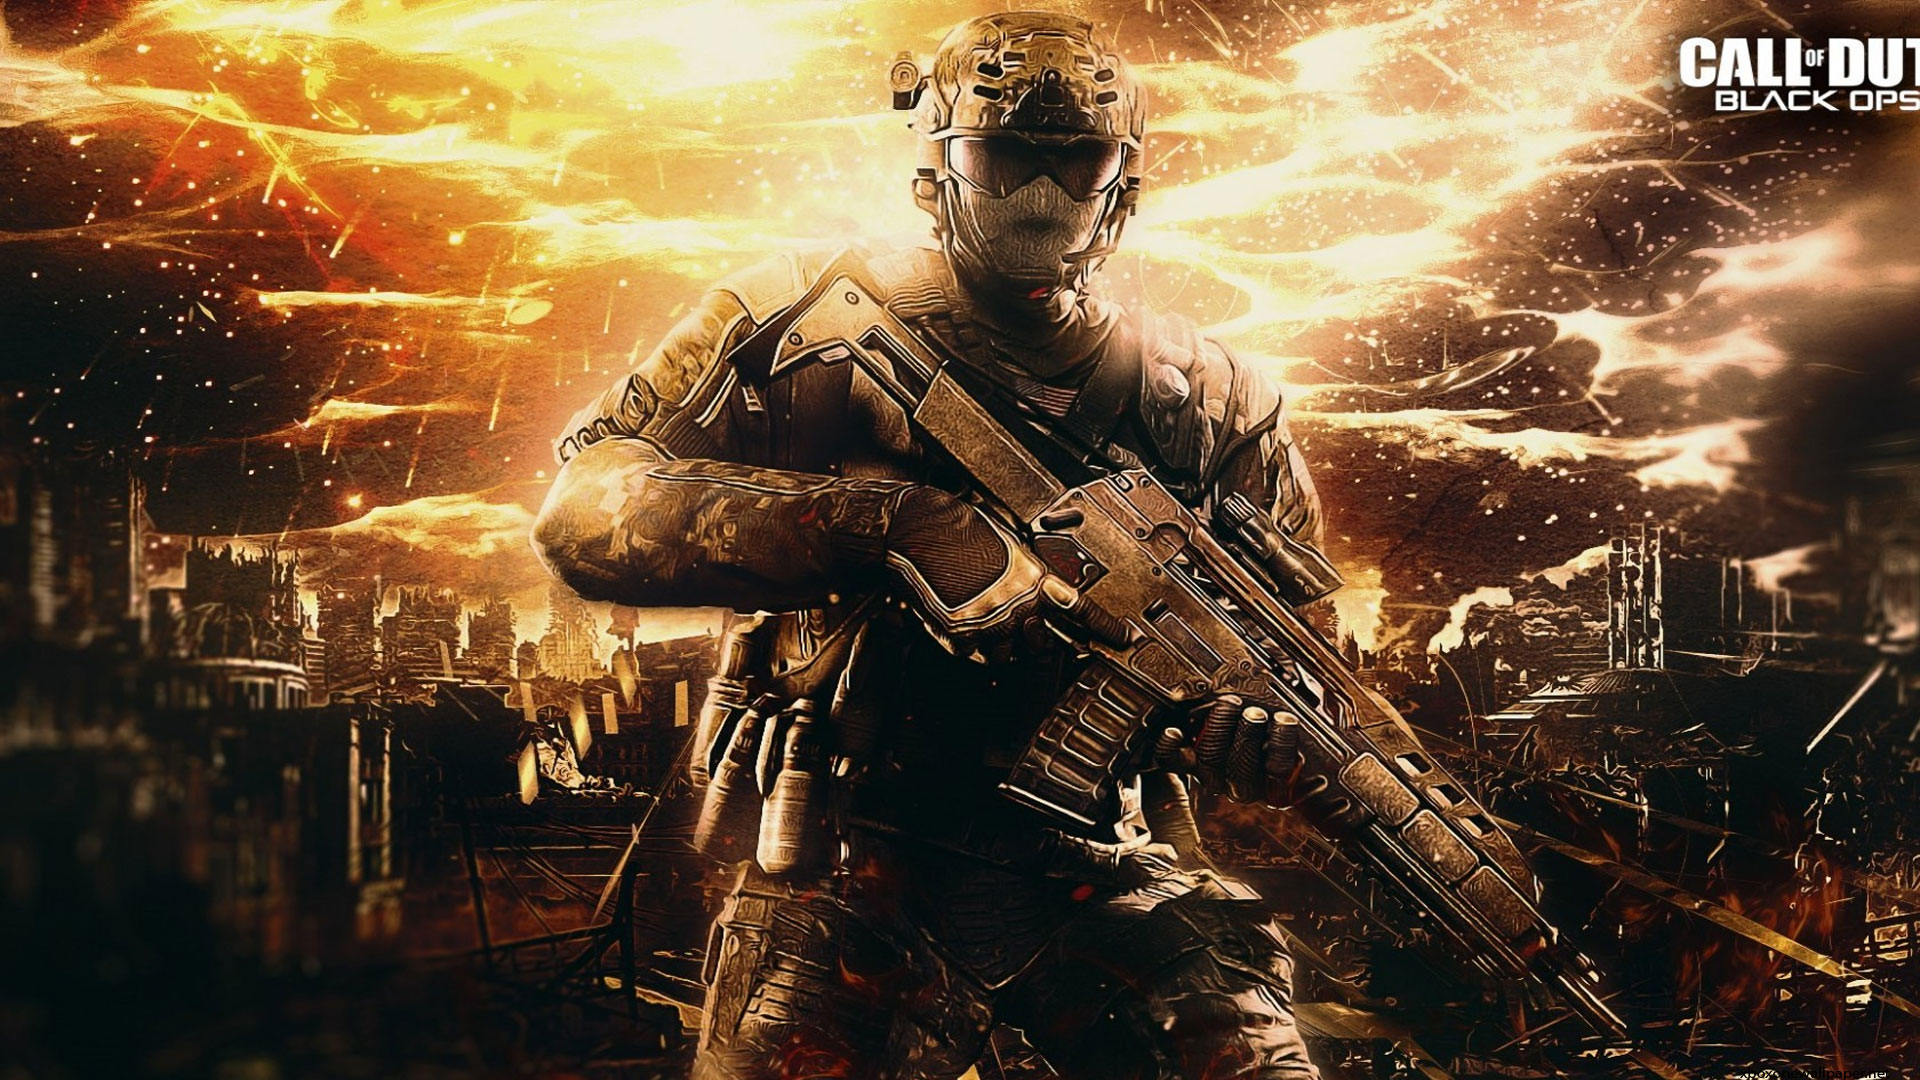 wallpapers de call of duty,action adventure game,shooter game,pc game,movie,action film